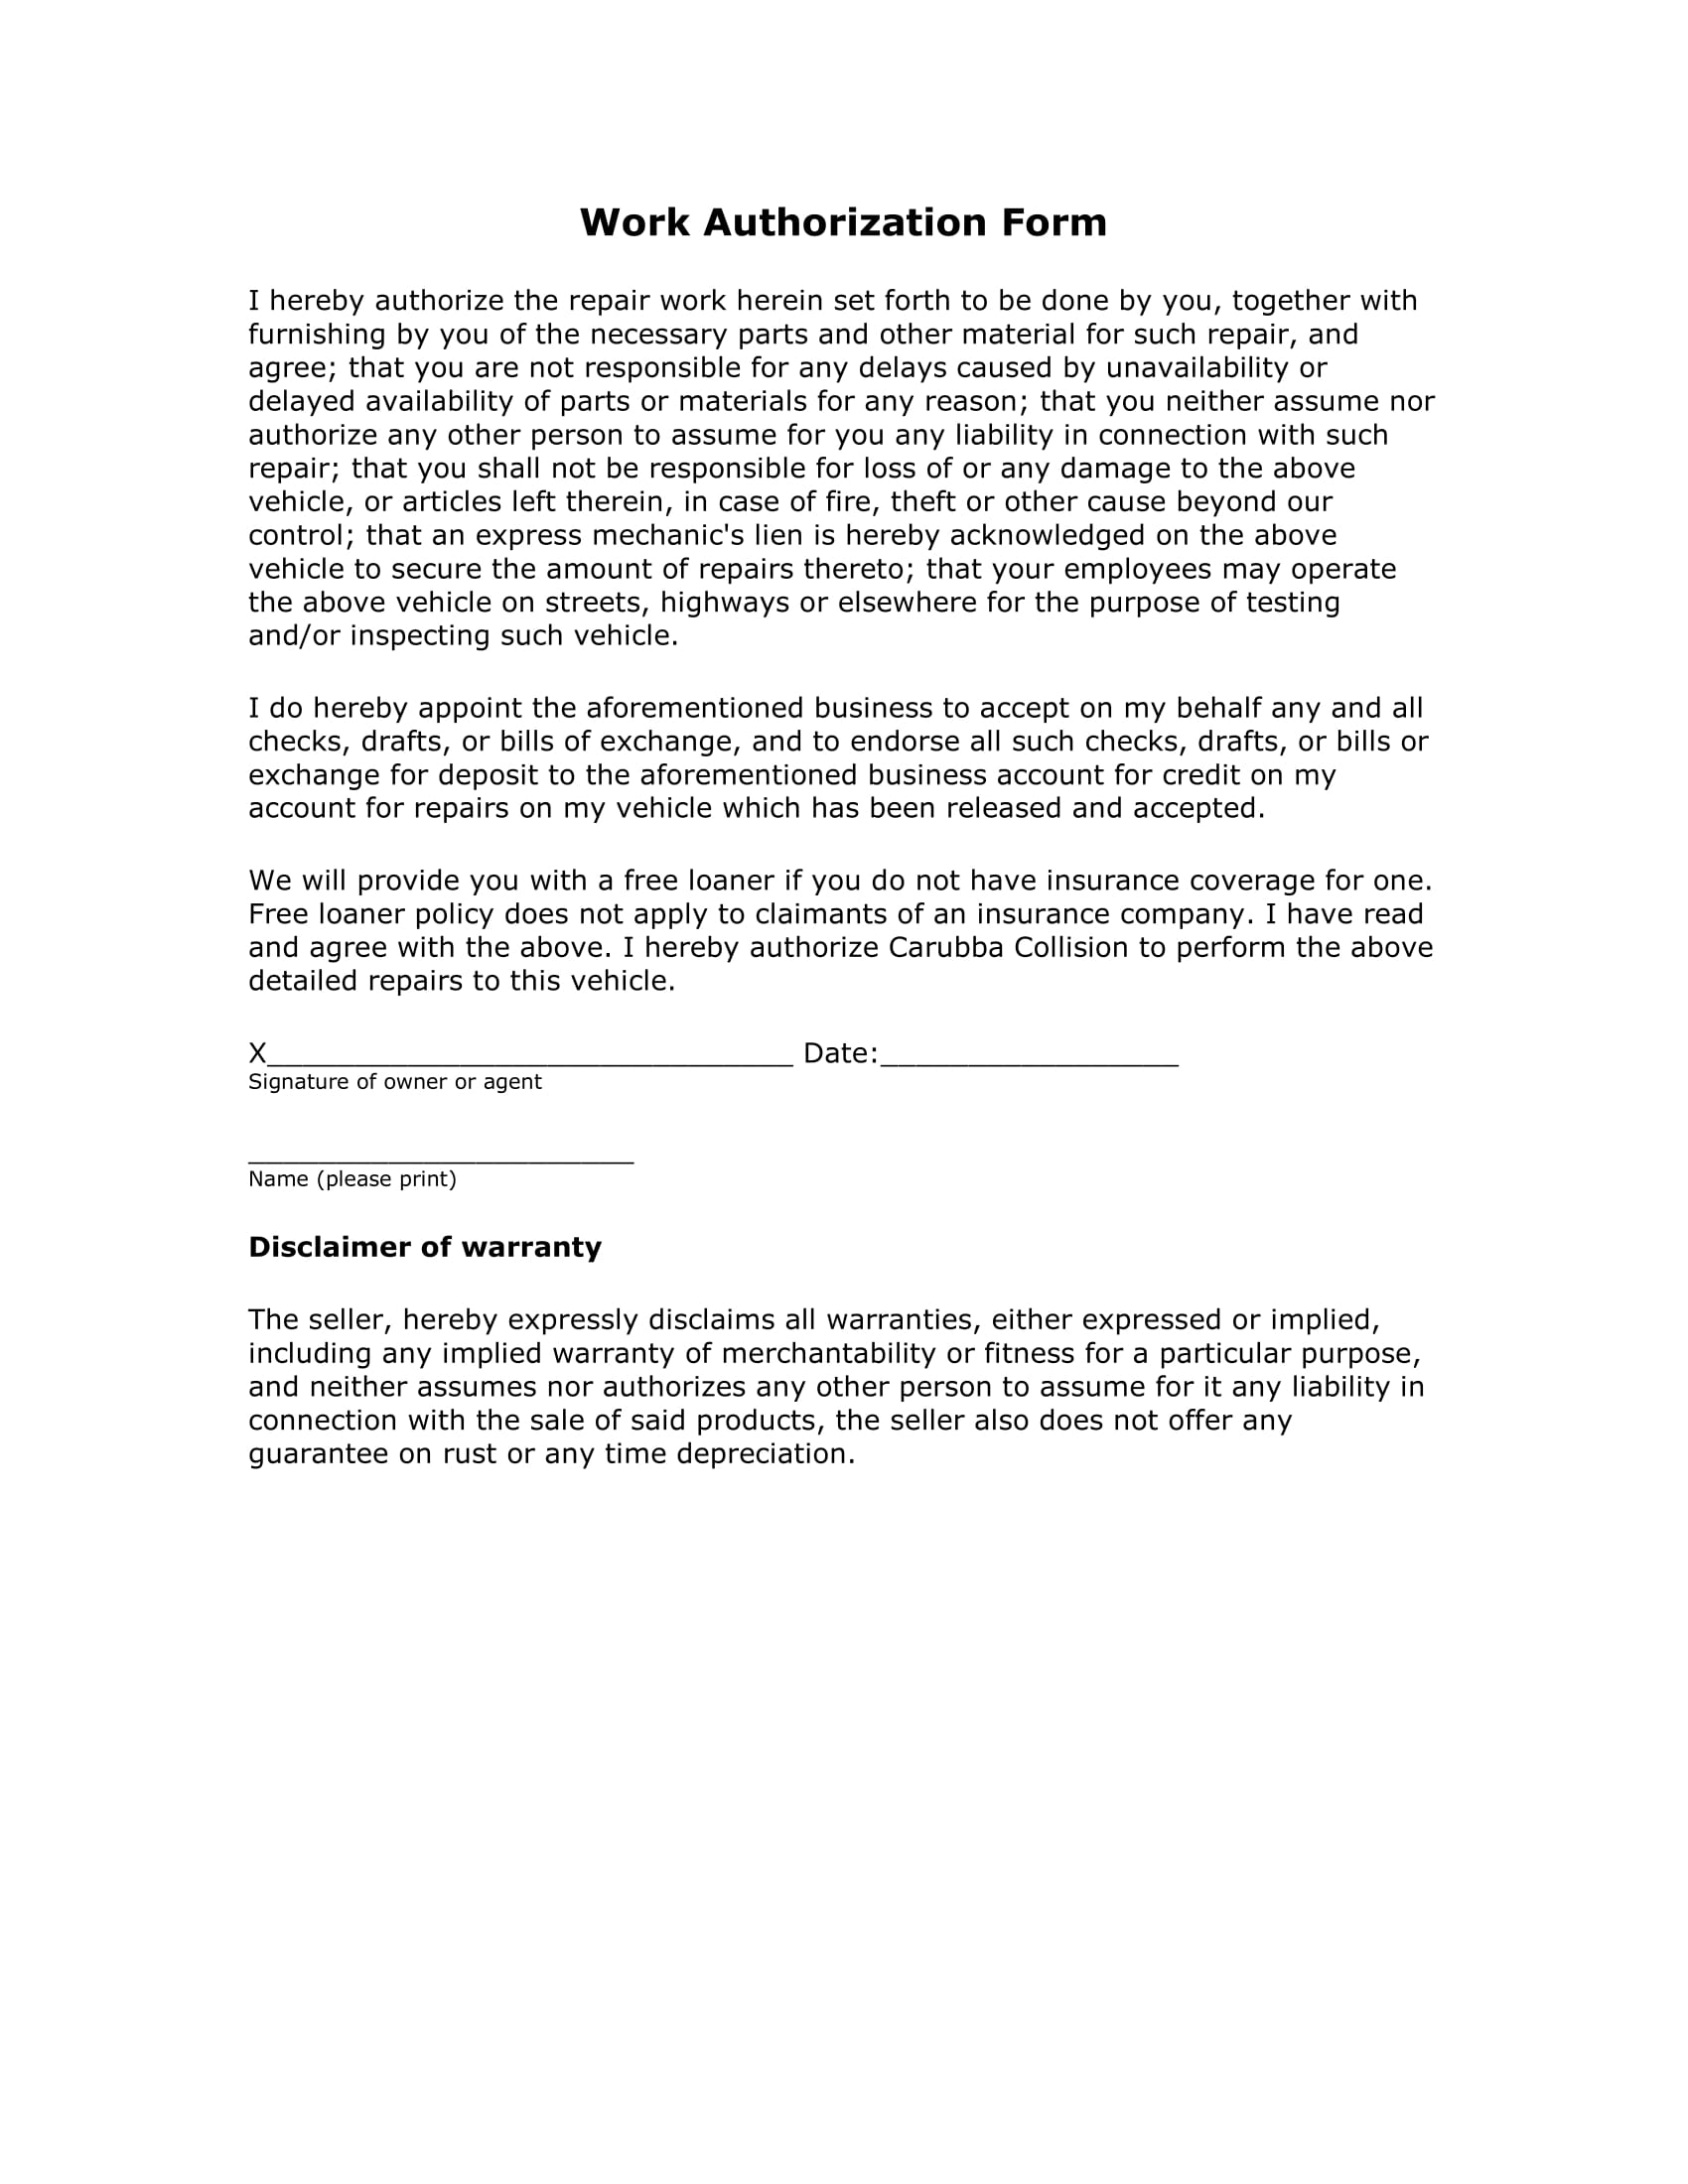 work authorization form in pdf 1